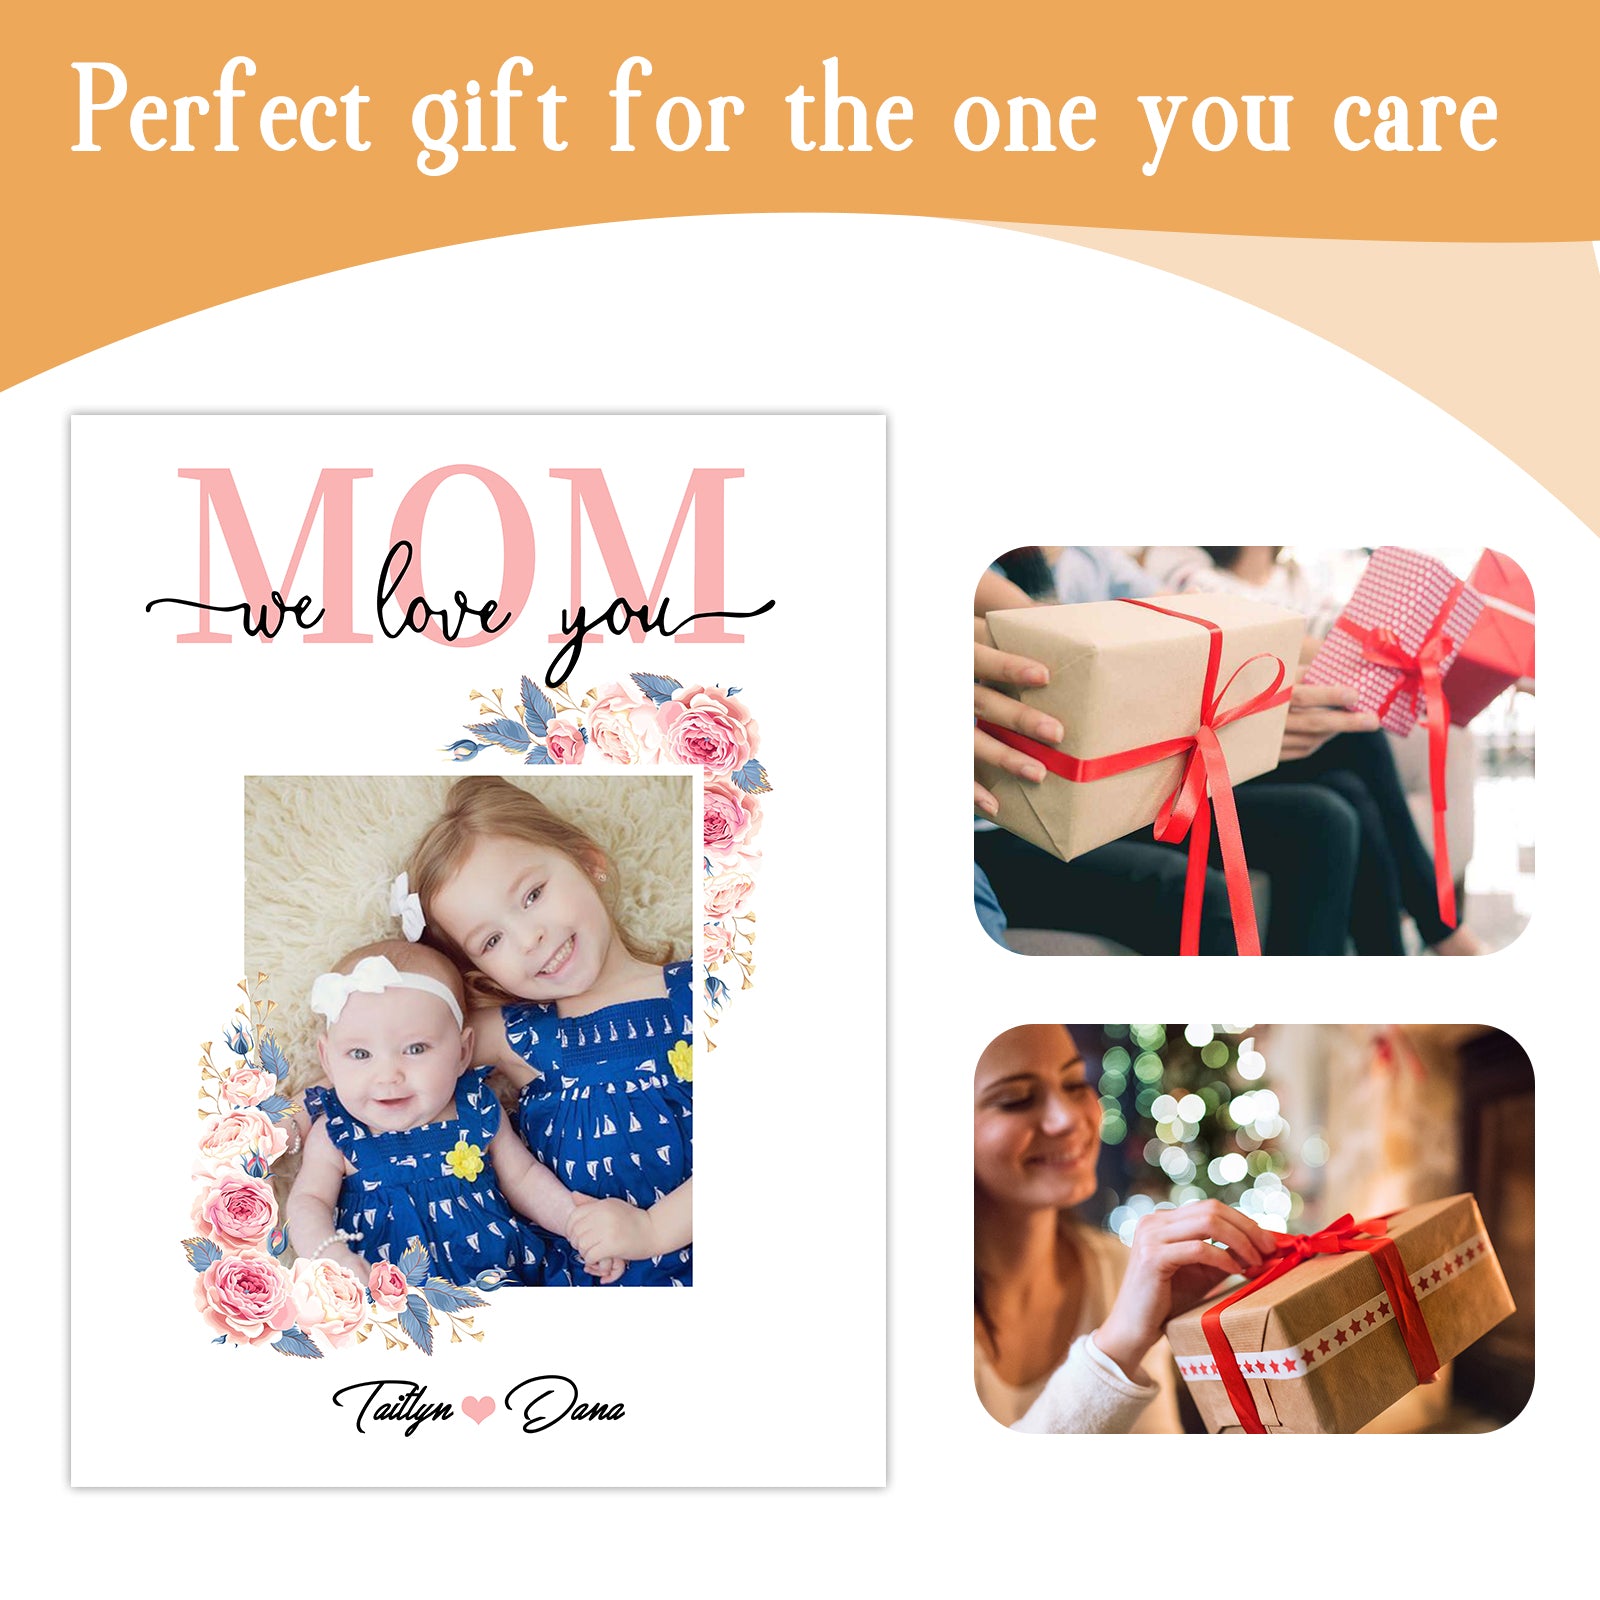 Personalized "MOM we love you" blanket - perfect gift to warm her heart on any occasion. - colorfulcustom